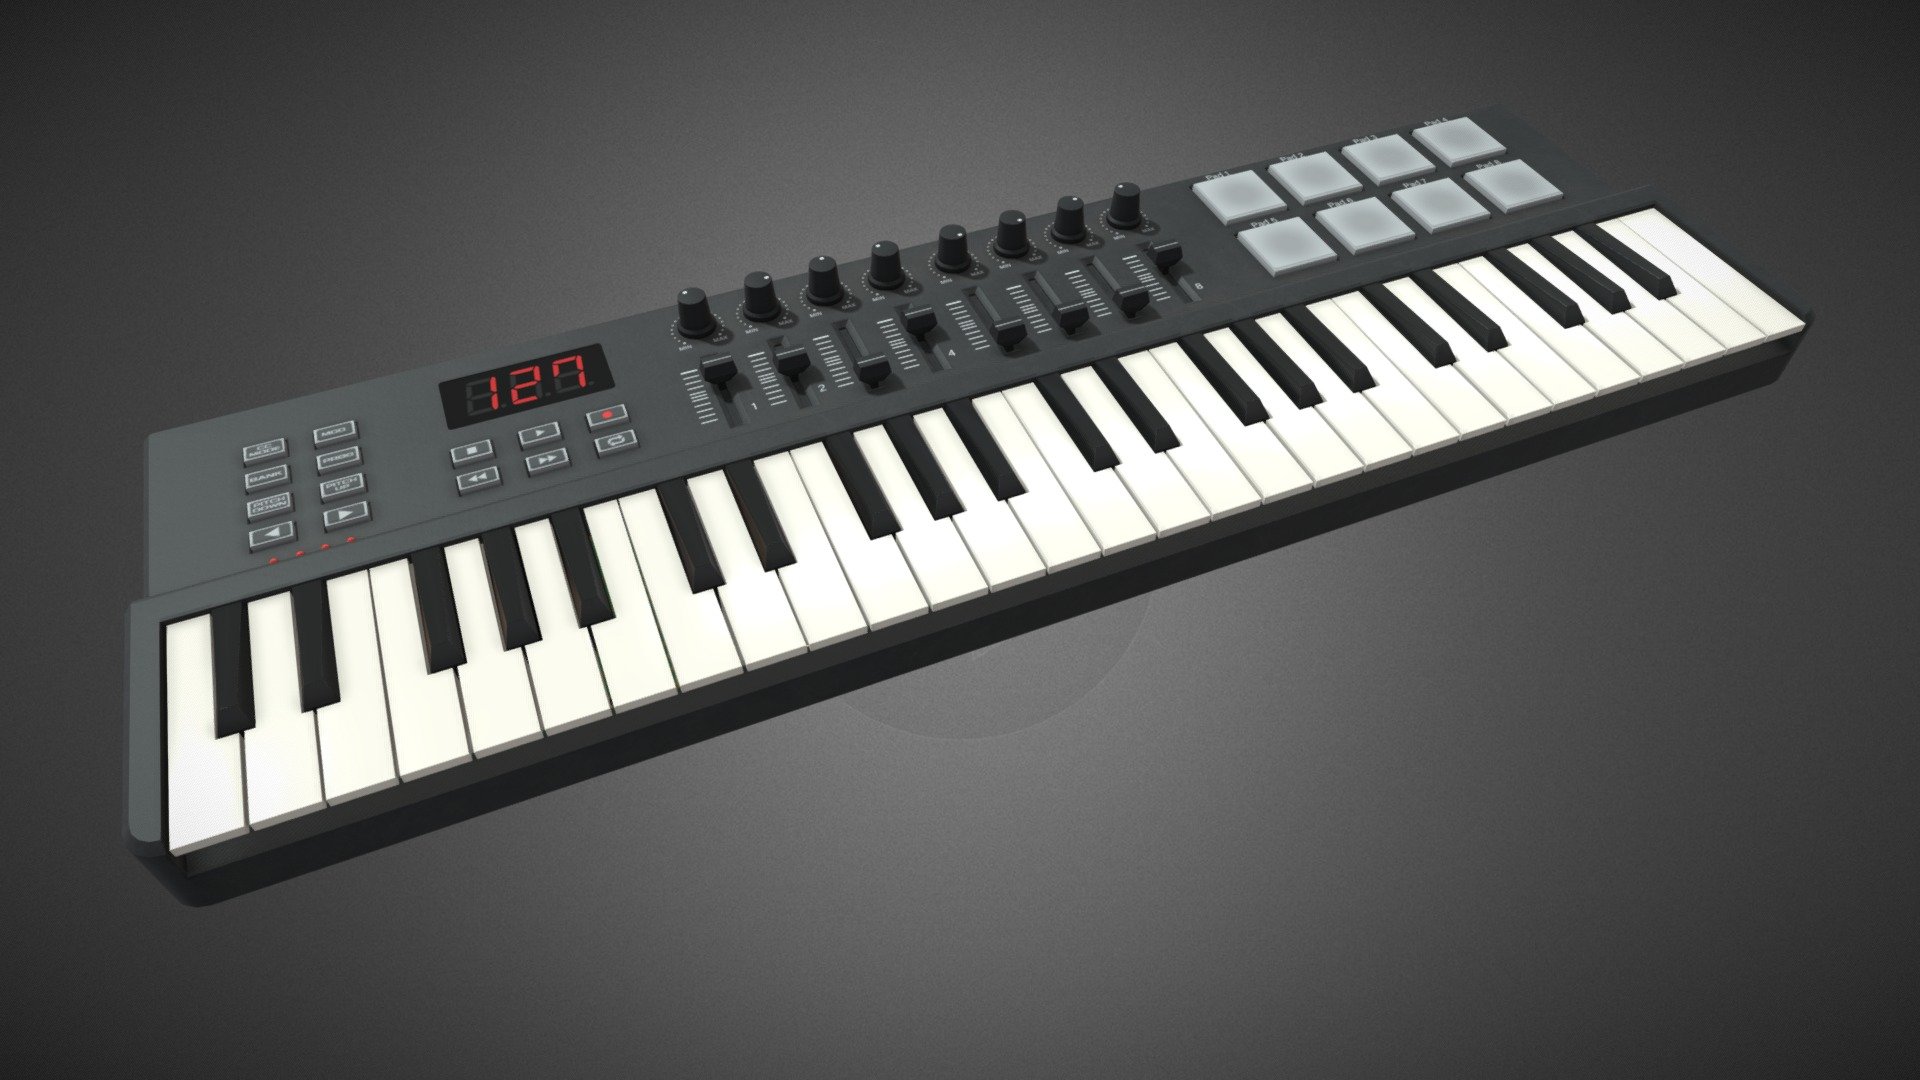 Compact 49 key MIDI controller with PBR materials.

Game engine ready, visualization ready, including FBX, OBJ with PBR textures and 3ds Max scene with Vray textures. Quads and tris only.

All keys, knobs and sliders are separate objects with the pivots in proper places, so you can animate it easily.

You can listen and free download the audio track here: https://soundcloud.com/ivan_wsk/the-entertainer-hardcore - Four octave MIDI Keyboard - 3D model by Ivan_WSK (@ivan-wsk) 3d model